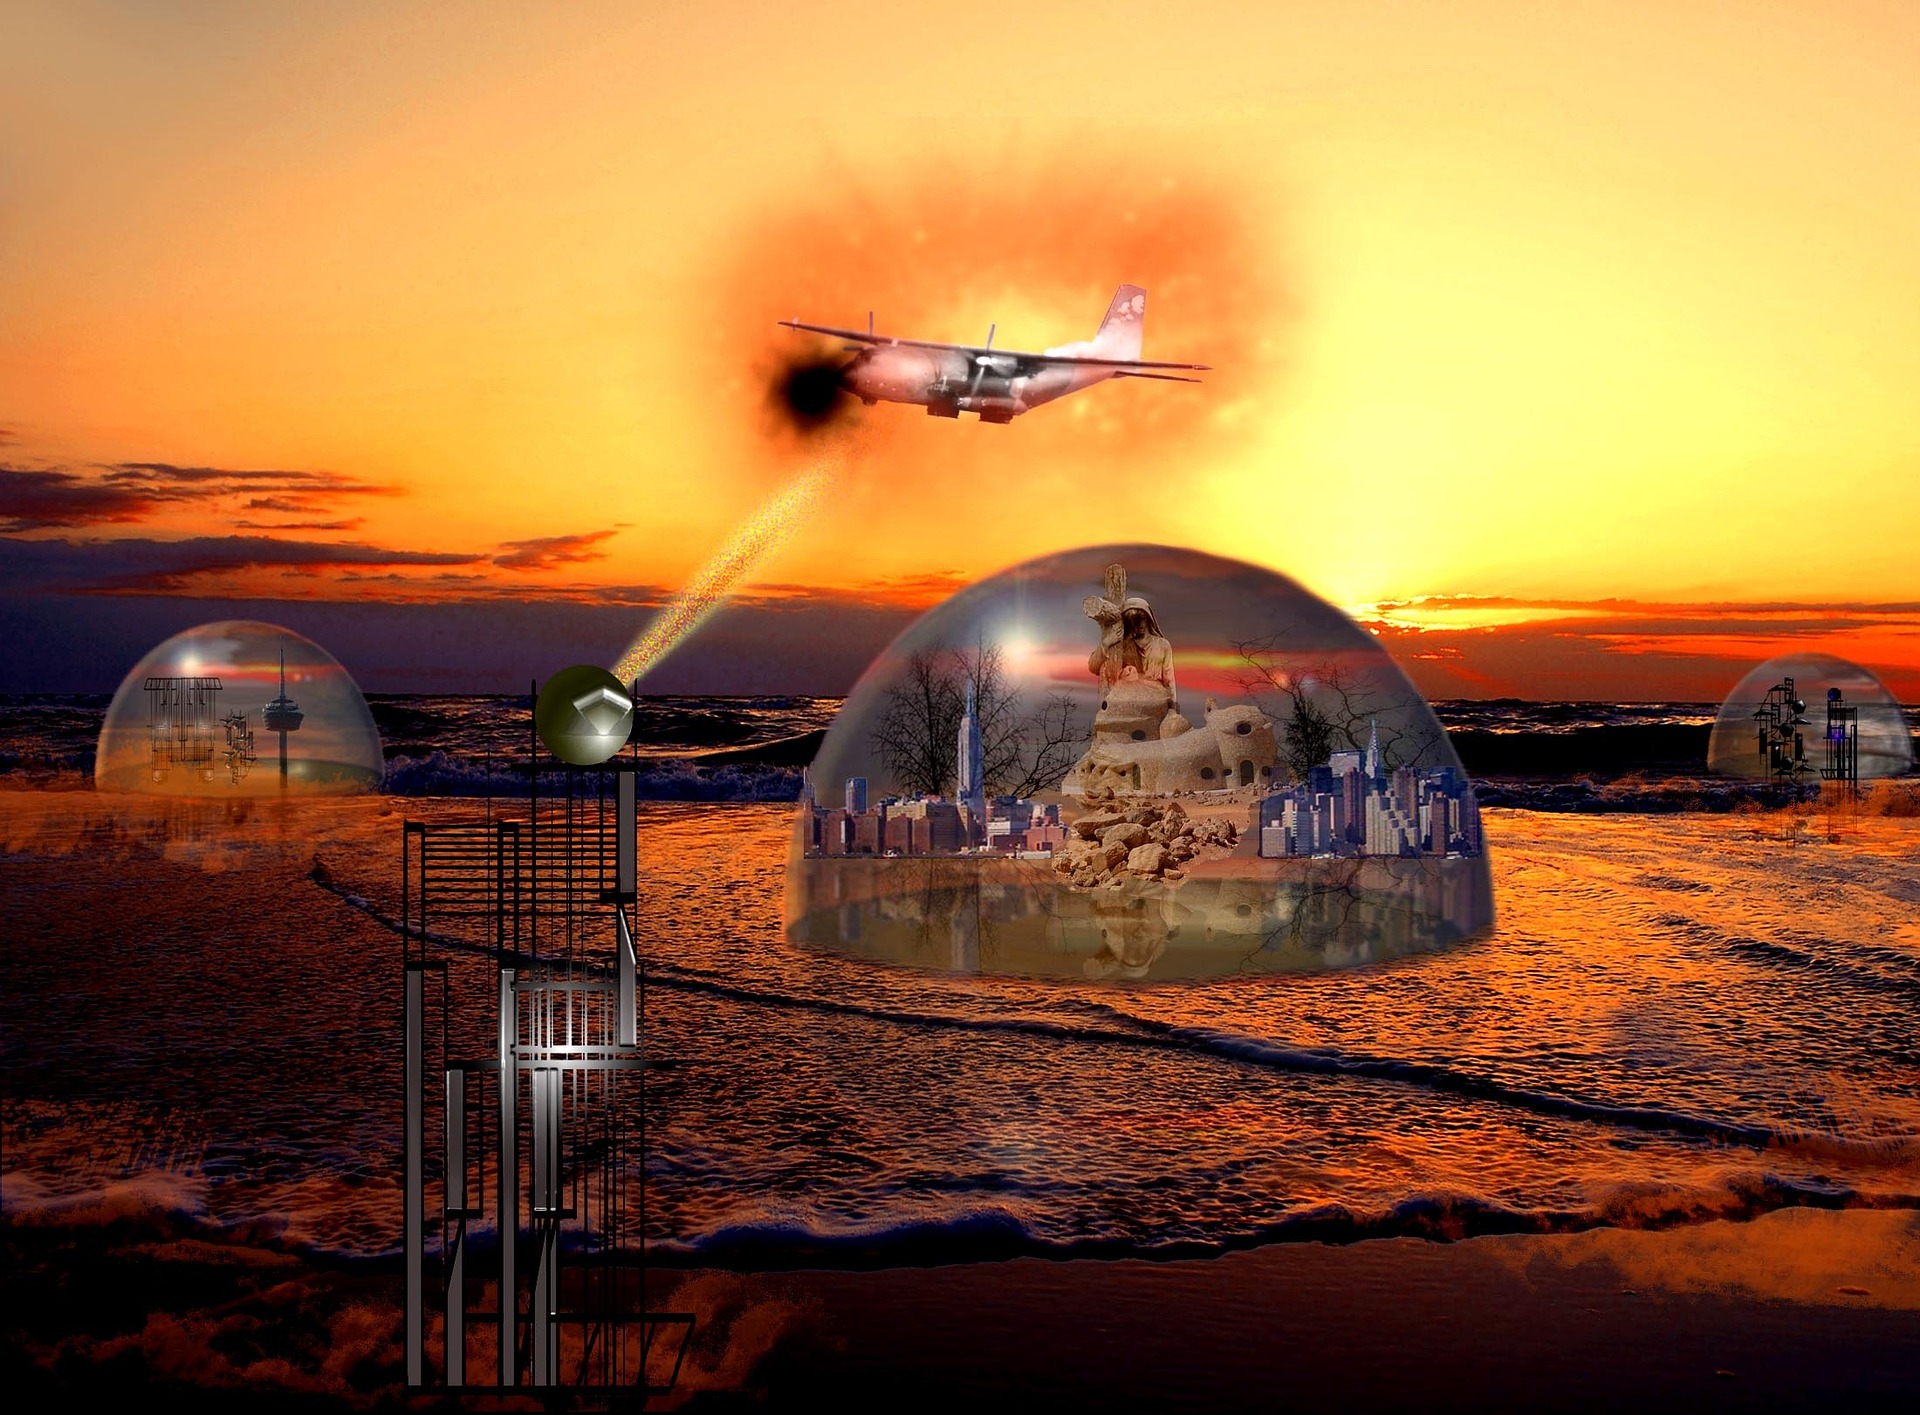 Multimedia art of an airplane flying over utopian closed ecological systems